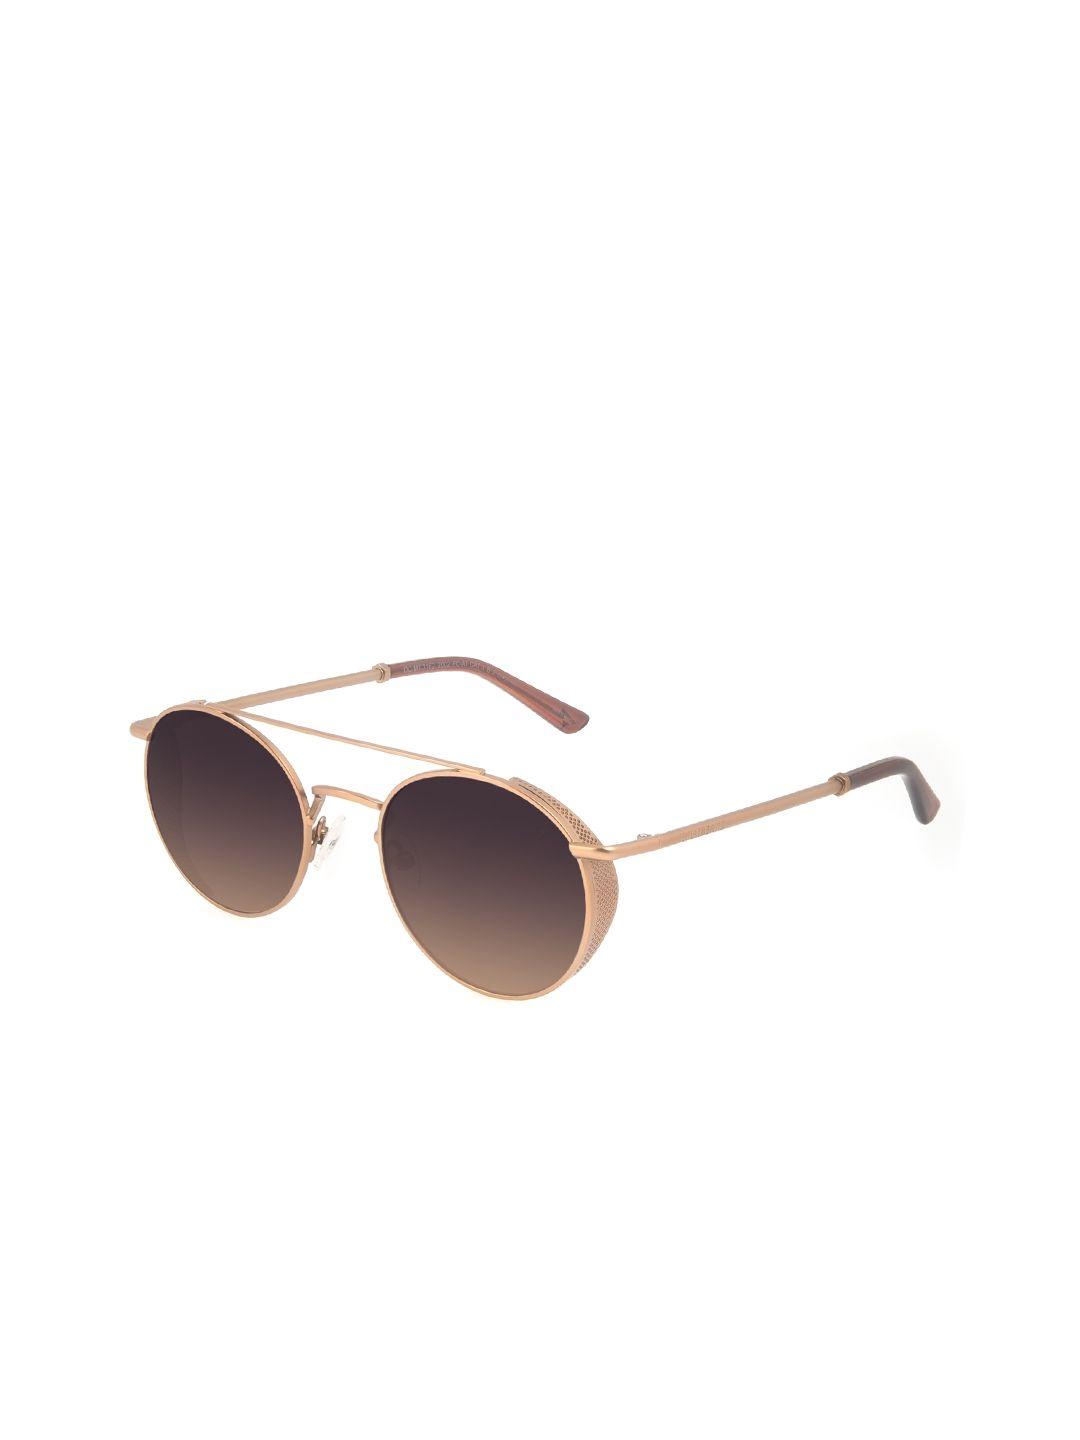 chilli beans unisex brown lens & gold-toned round sunglasses with uv protected lens